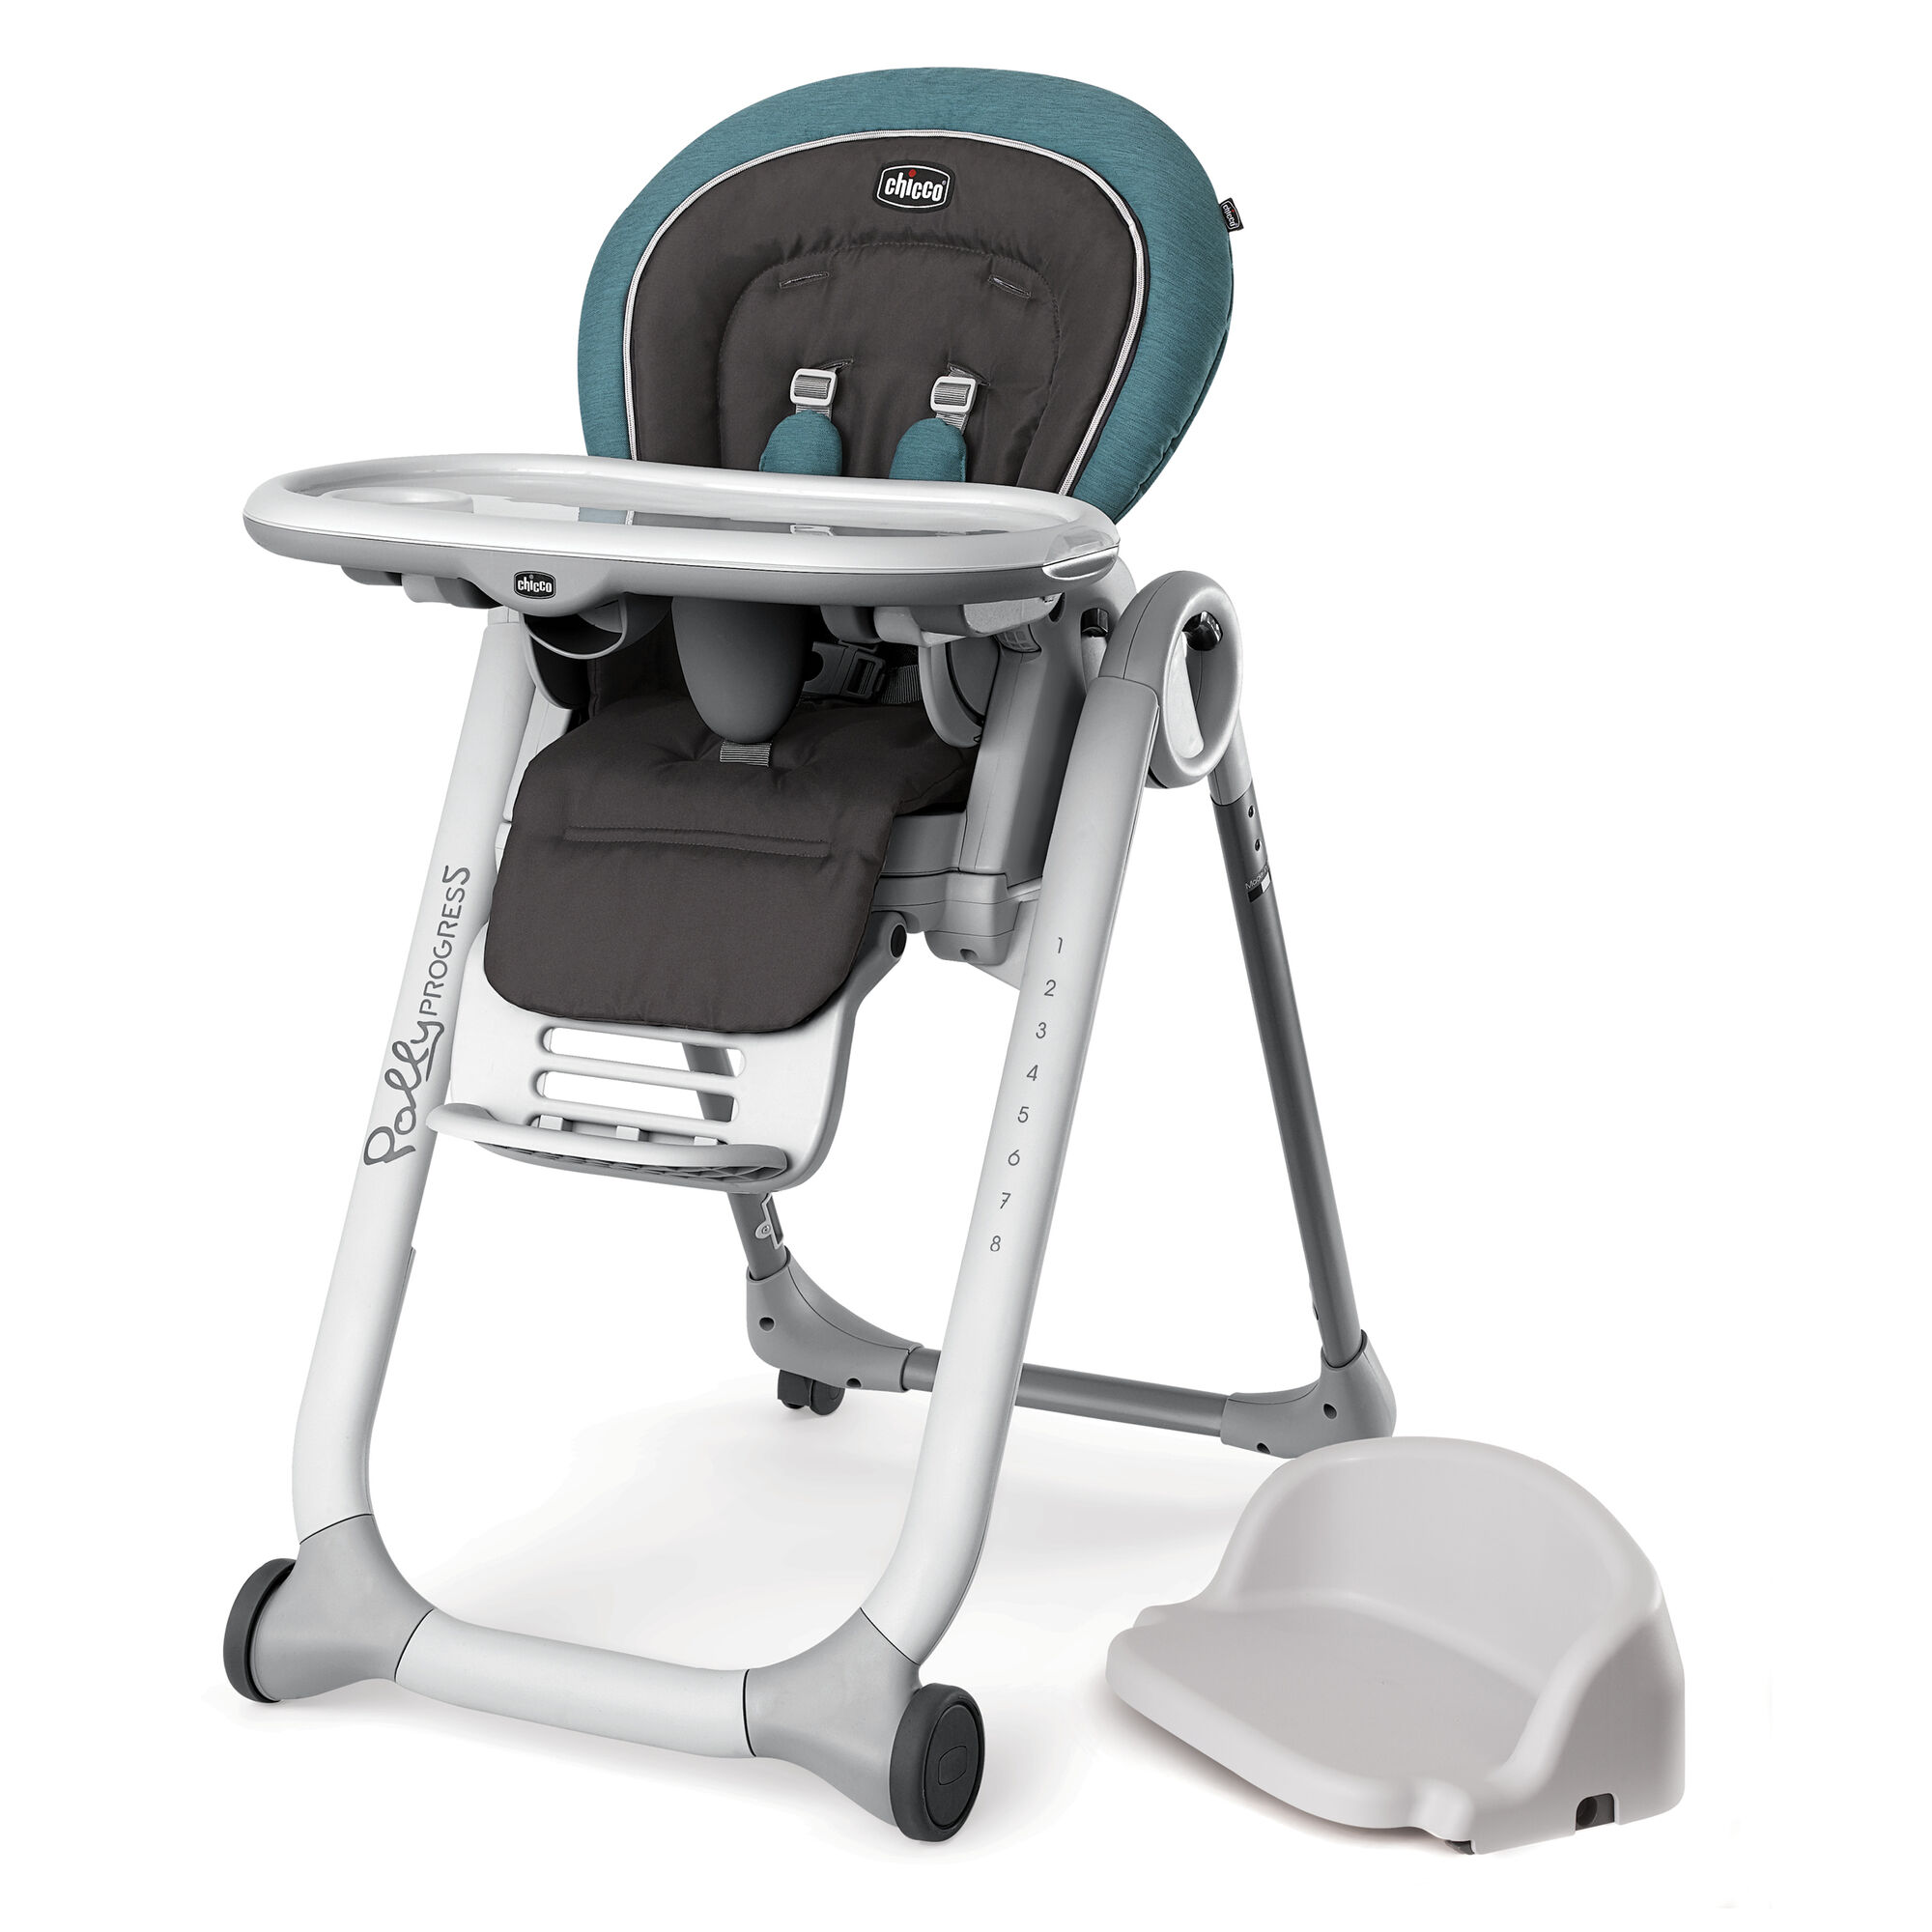 heroïne Gewend aan ziel Chicco Polly progress 5-in-1 Calypso Polly progress High Chairs  05079408580070 - prices and ratings | 5 in 1 Calypso Toddler Booster Big  kid booster Y | conzumr.com